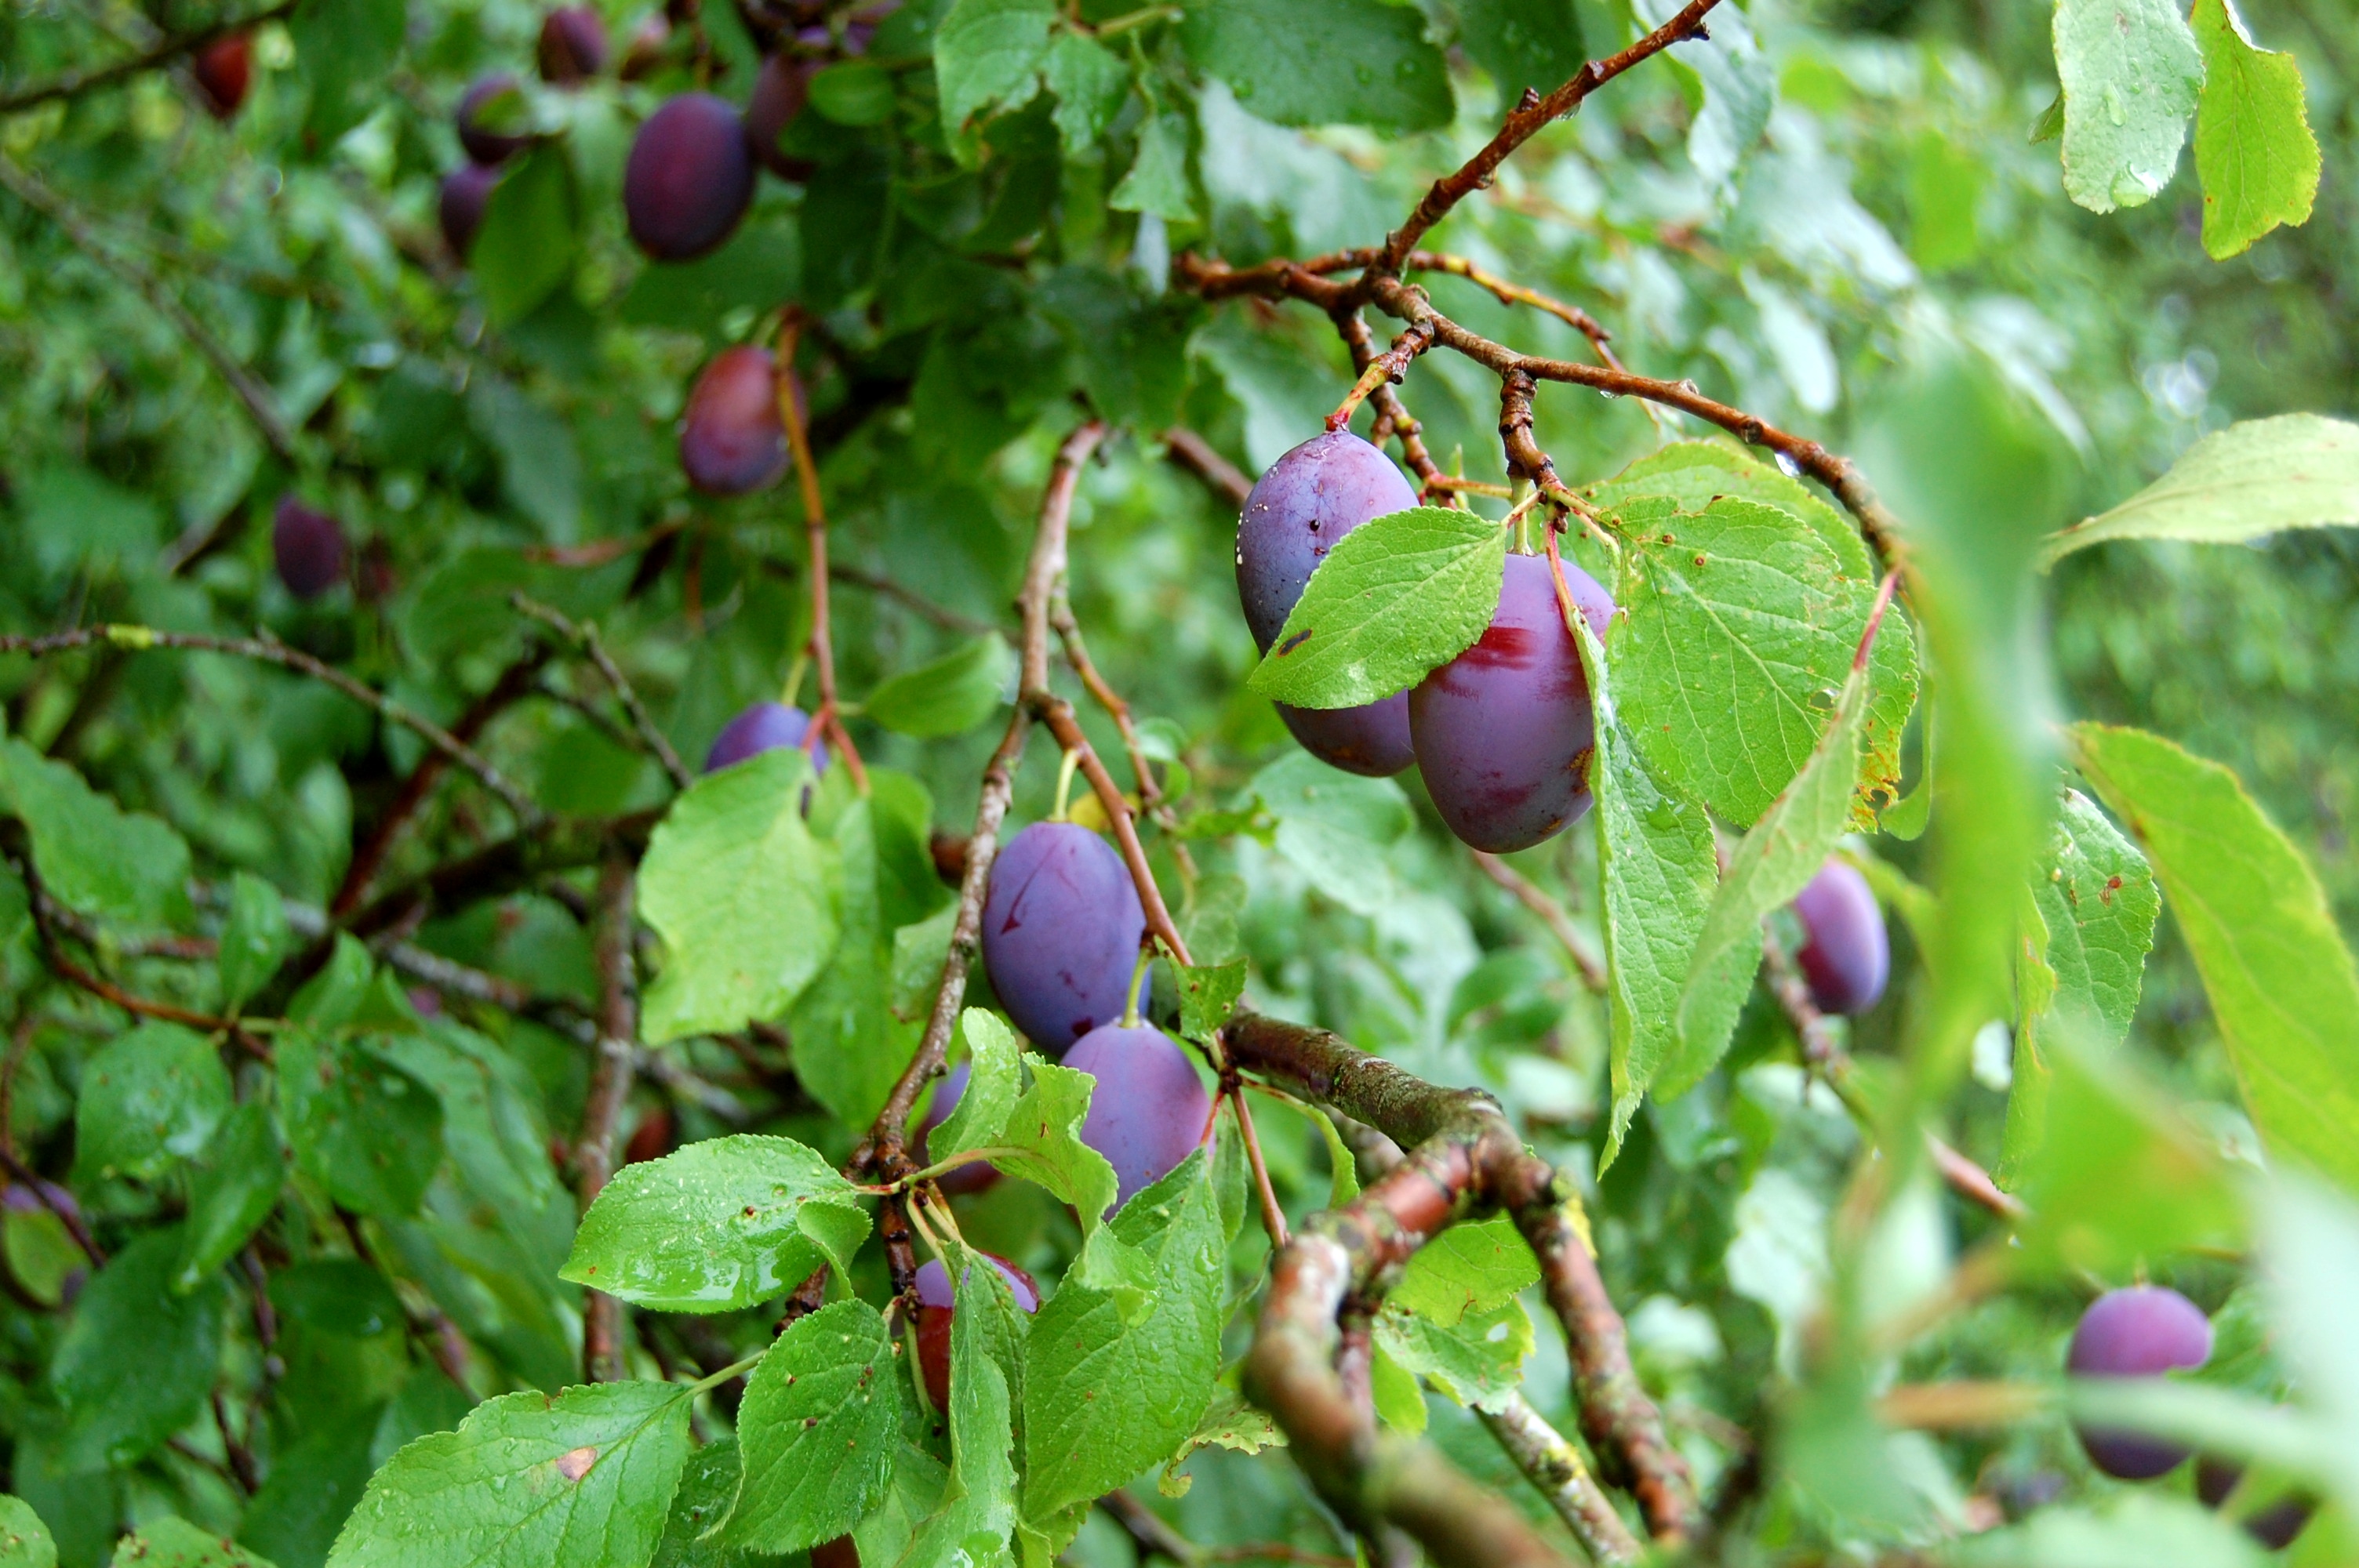 Plums on the former battlefield.